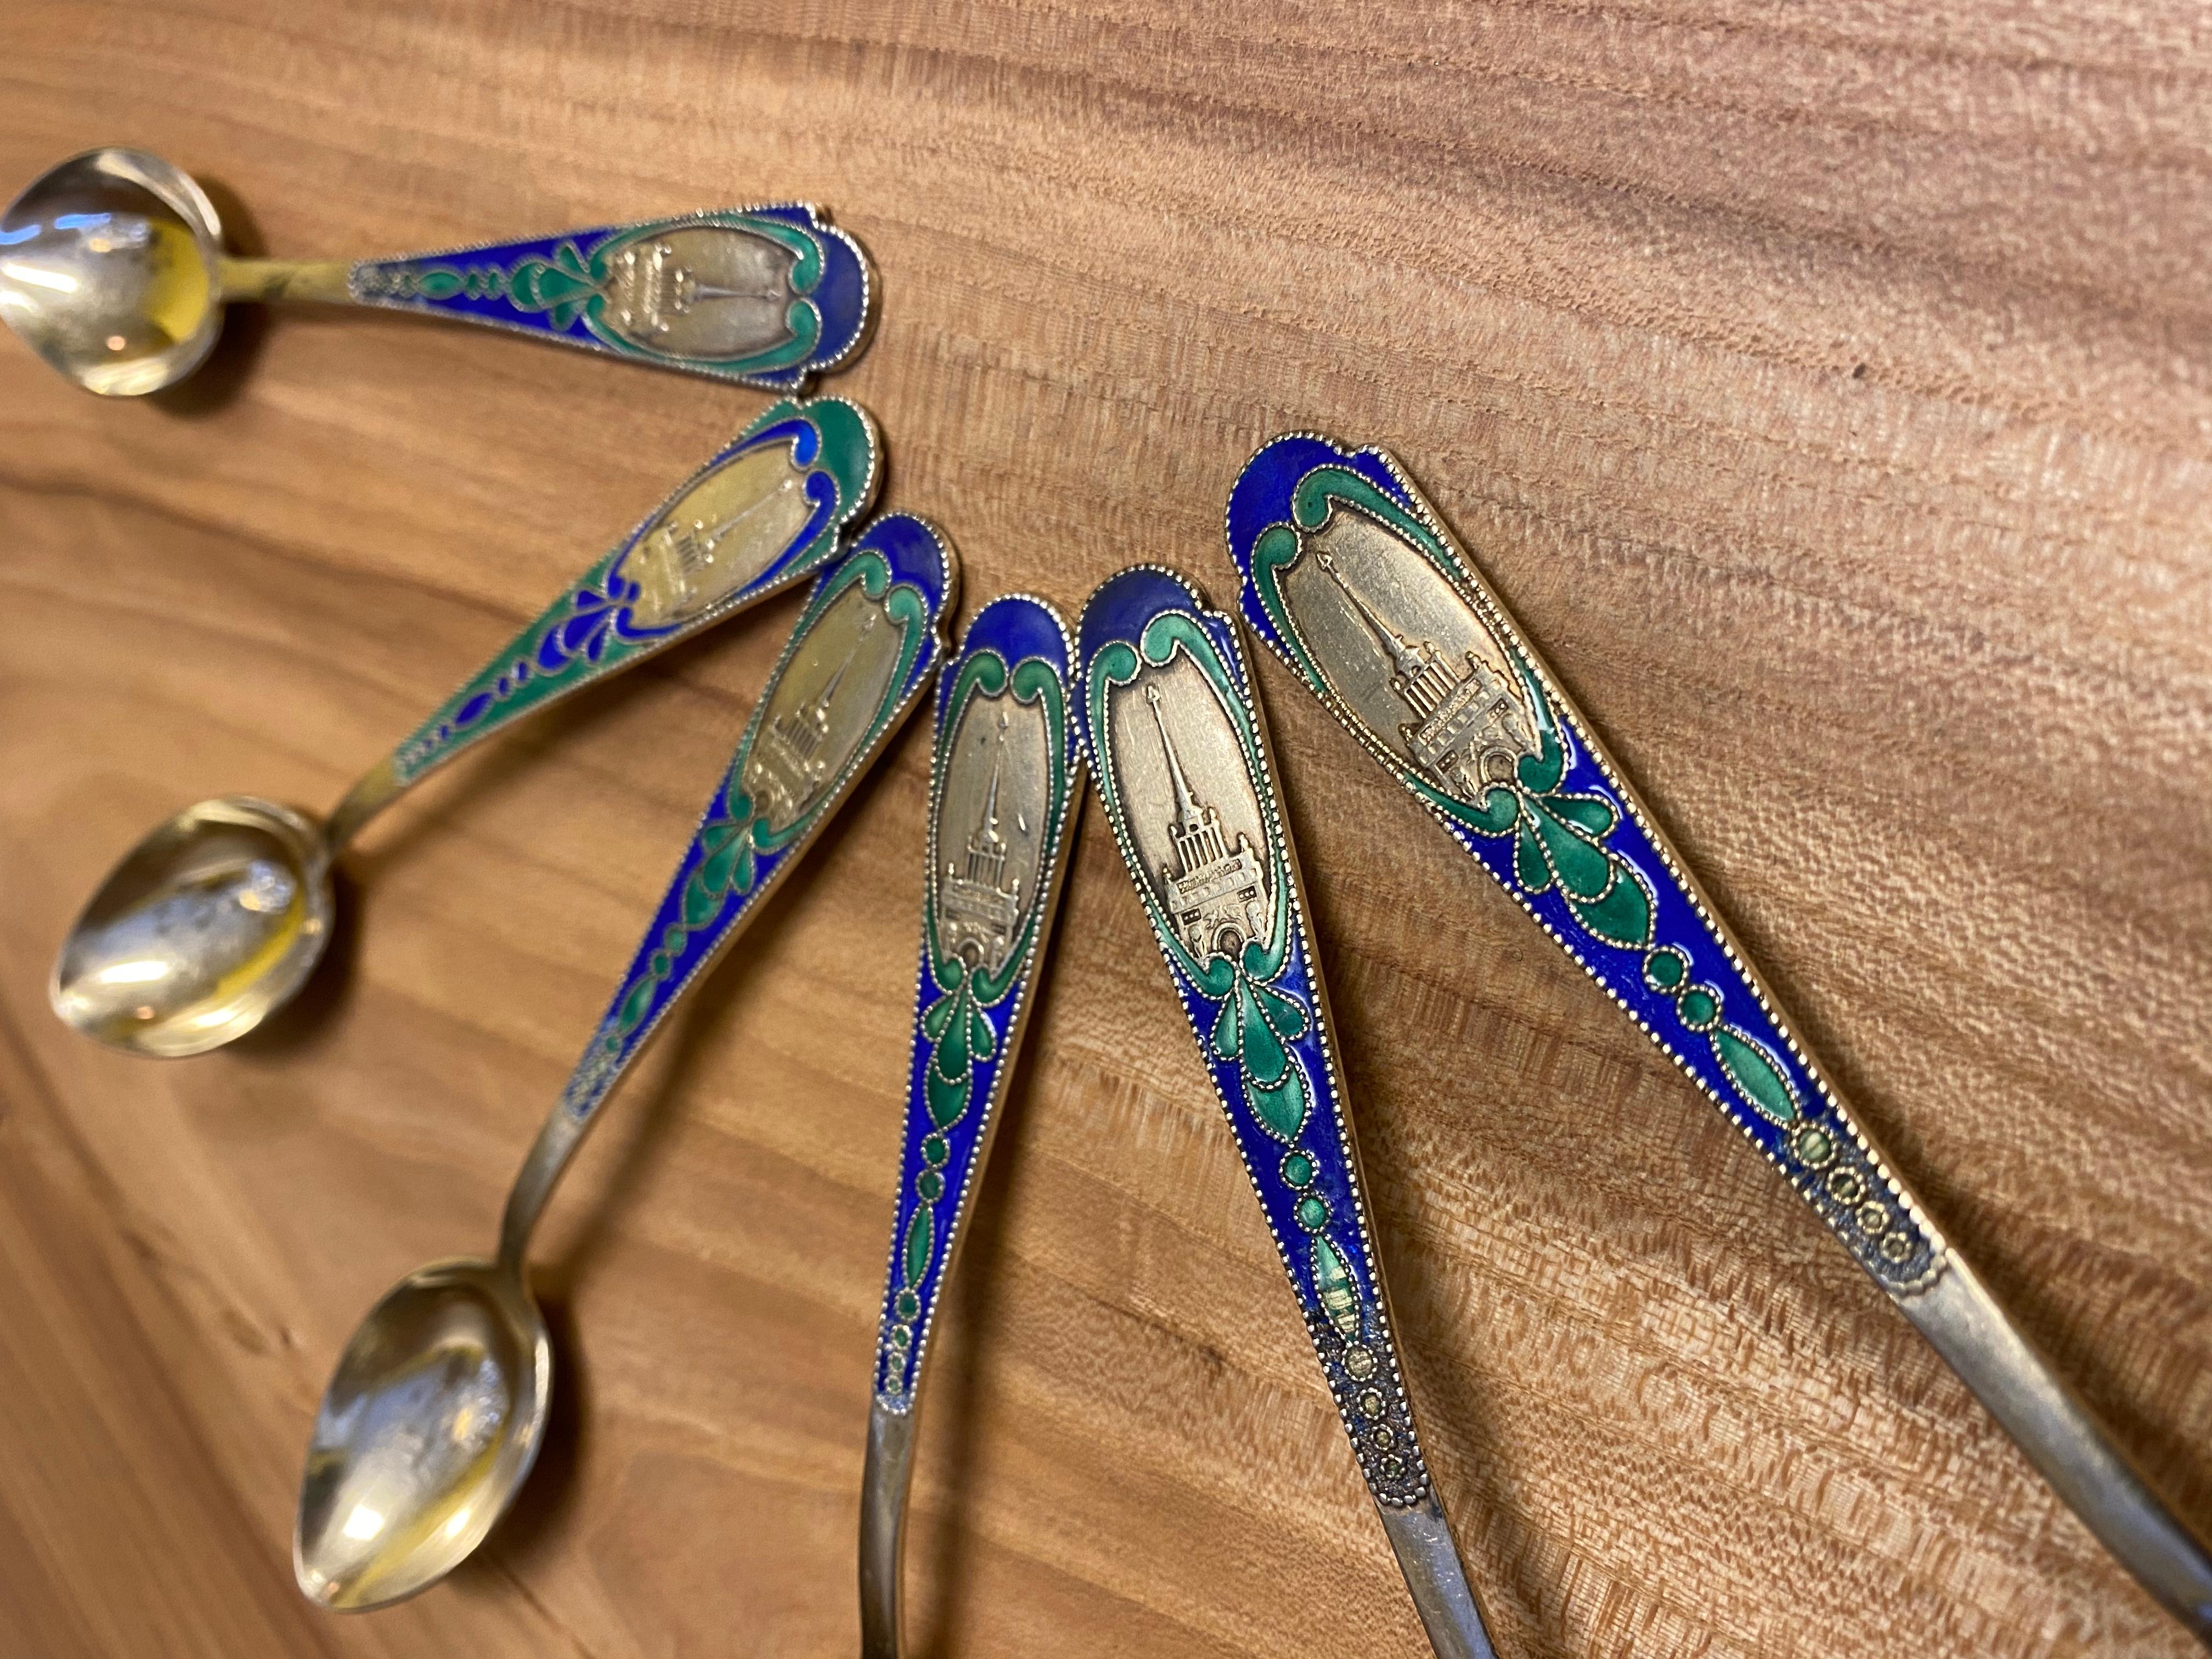 Set of 6 Russian Enamel Spoons Fine and Rare Soviet Silver Spoons For Sale 1